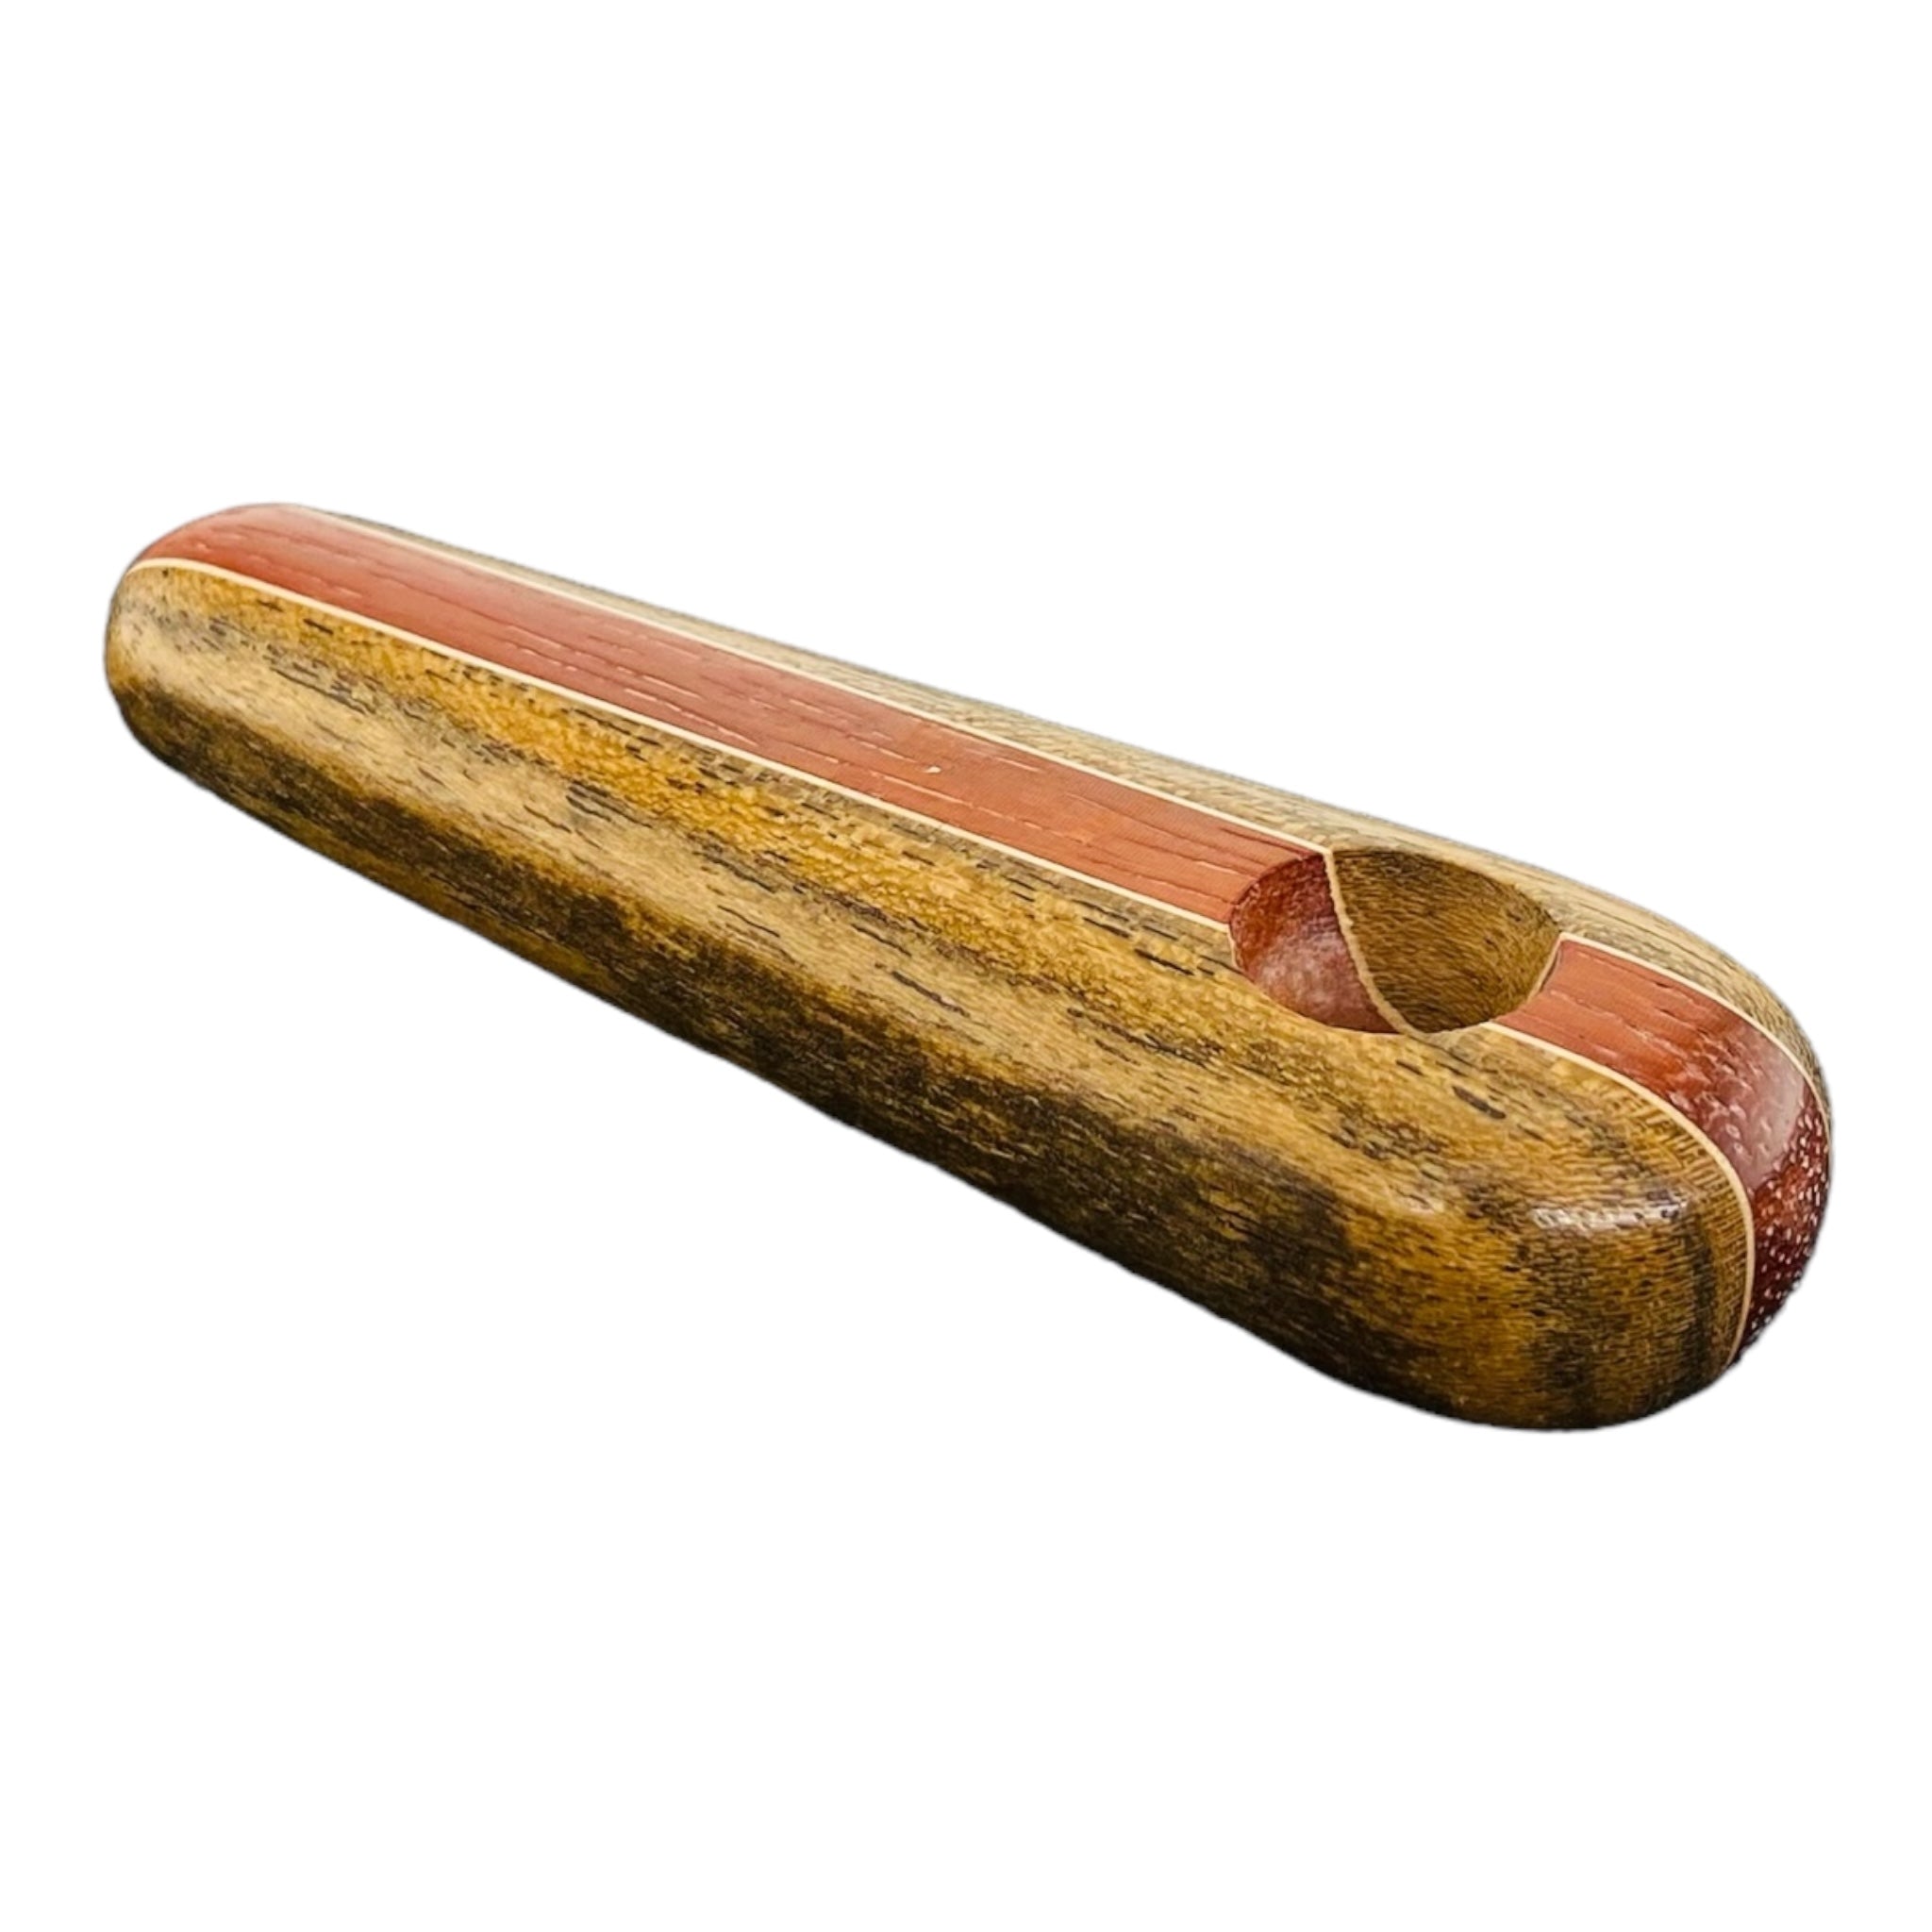 Wood Hand Pipe - Oval Wood Pipe With Two Tone Hardwood